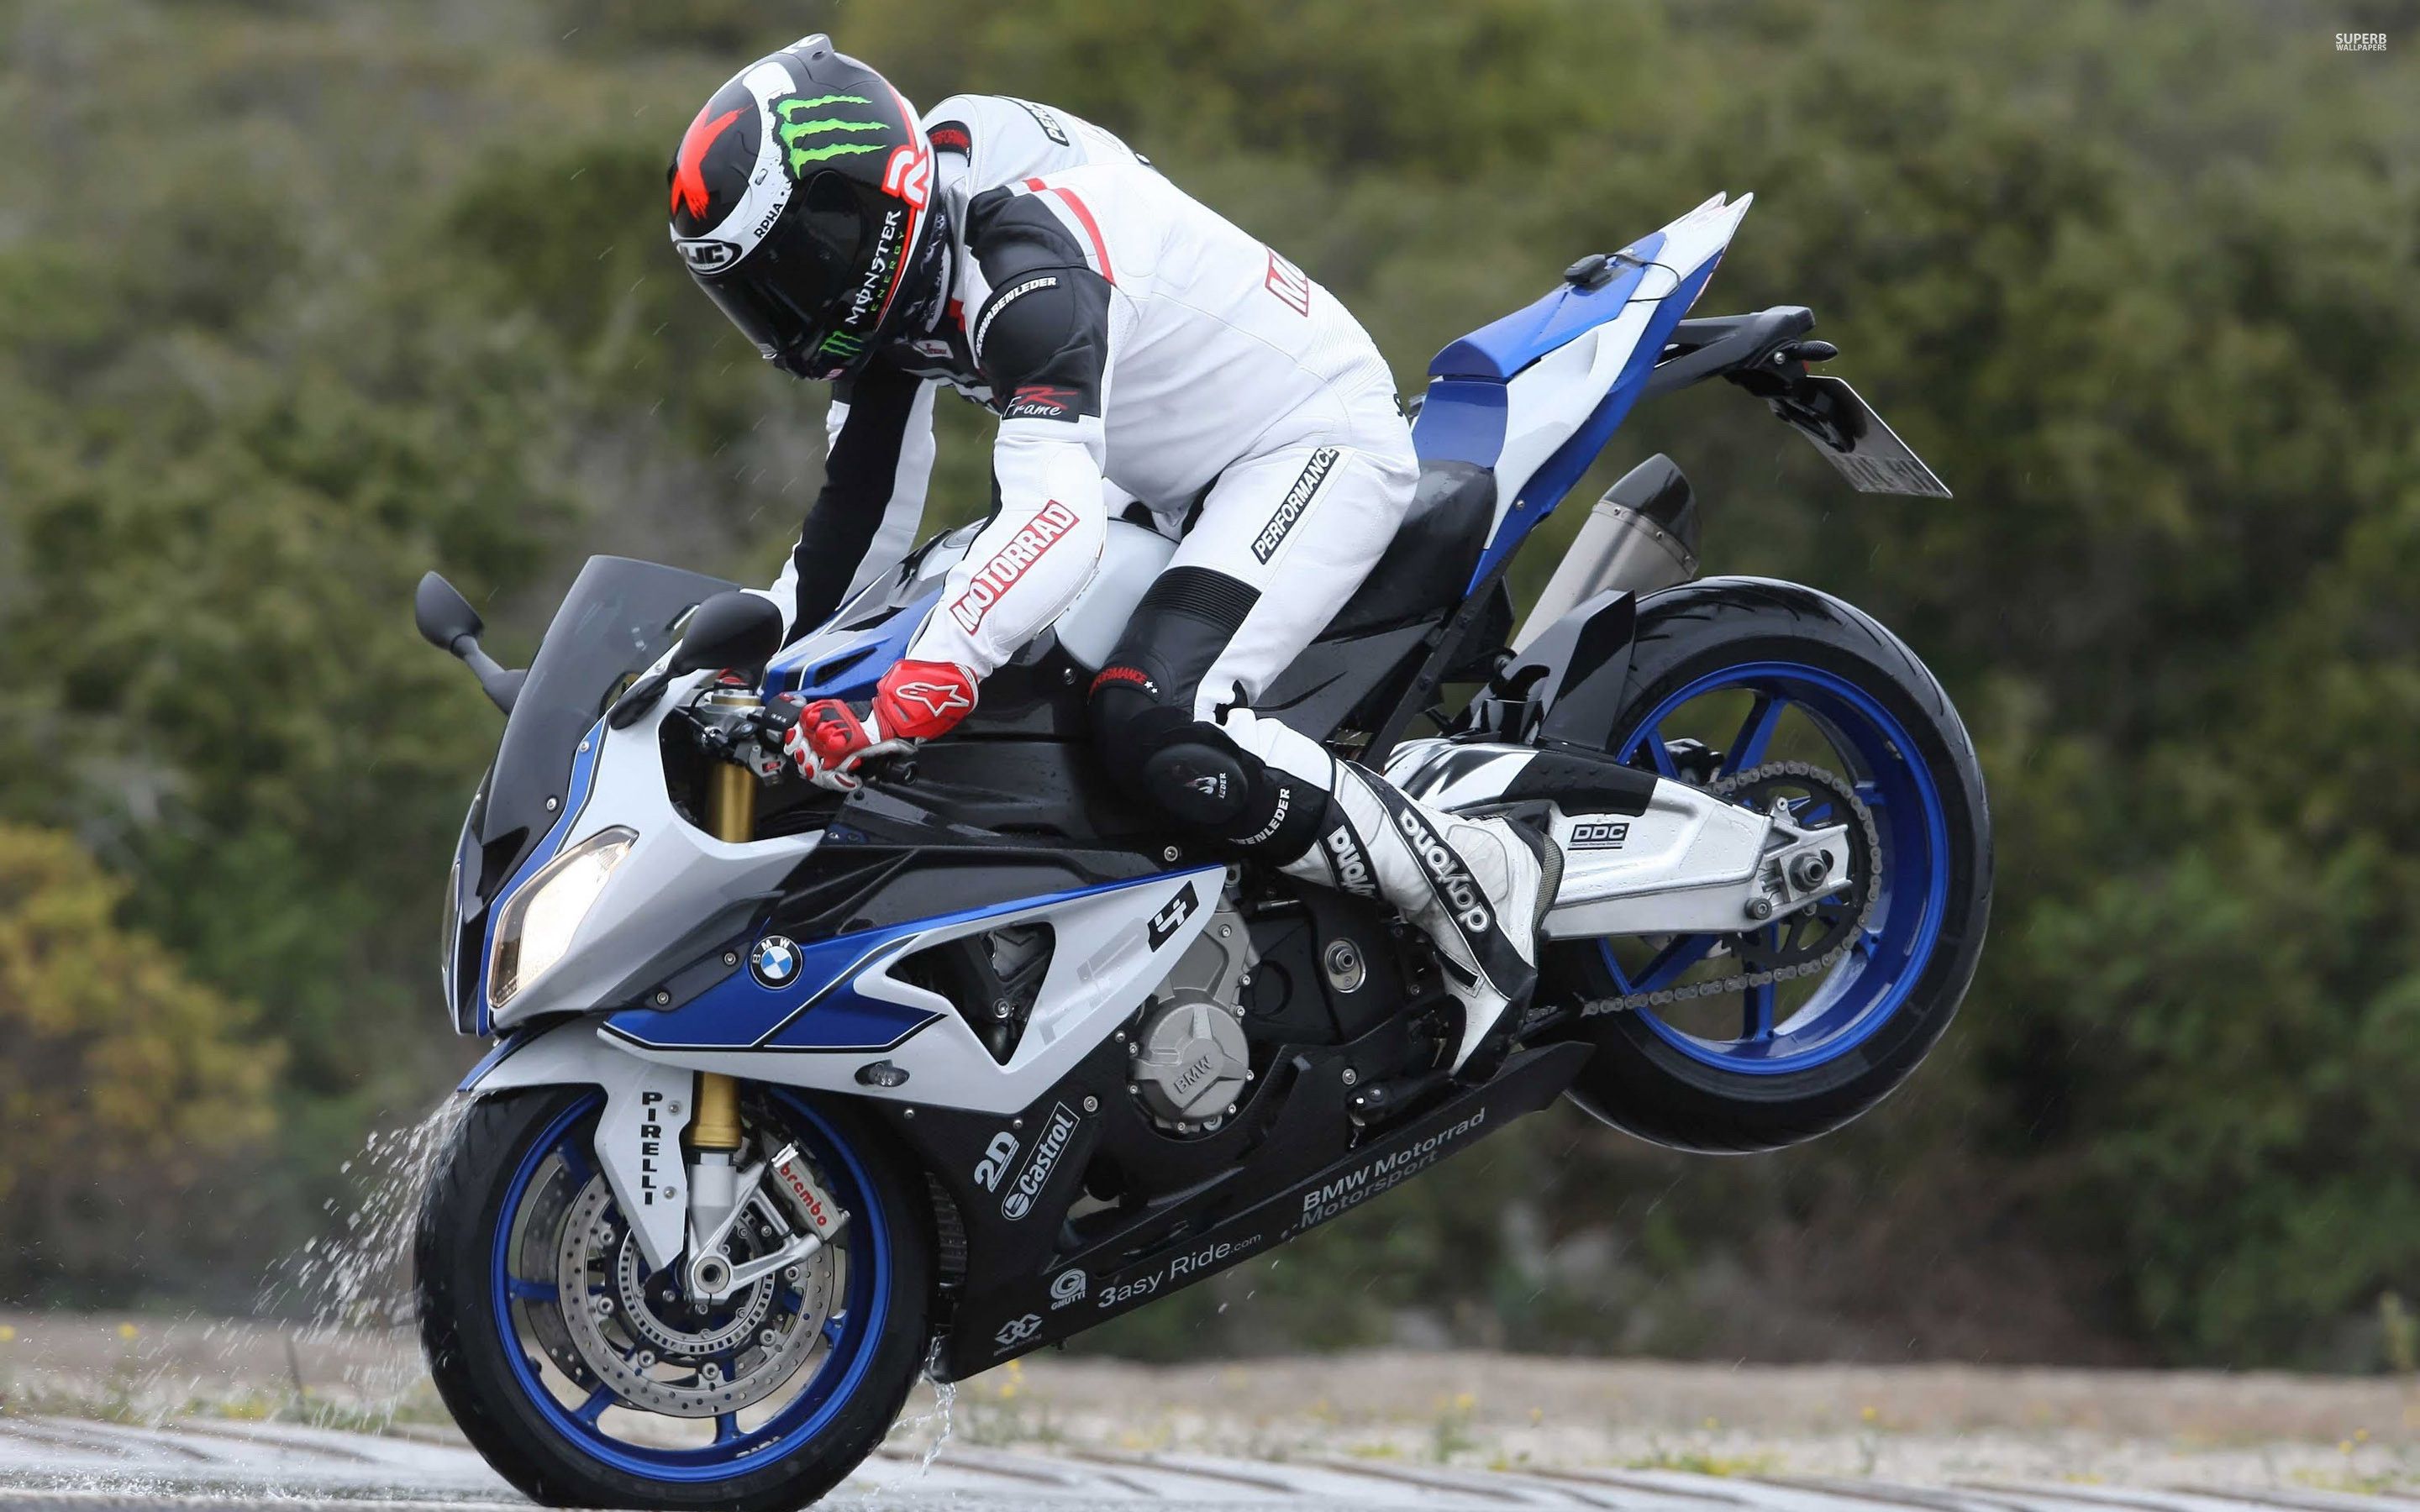 Bmw S1000rr Wallpapers